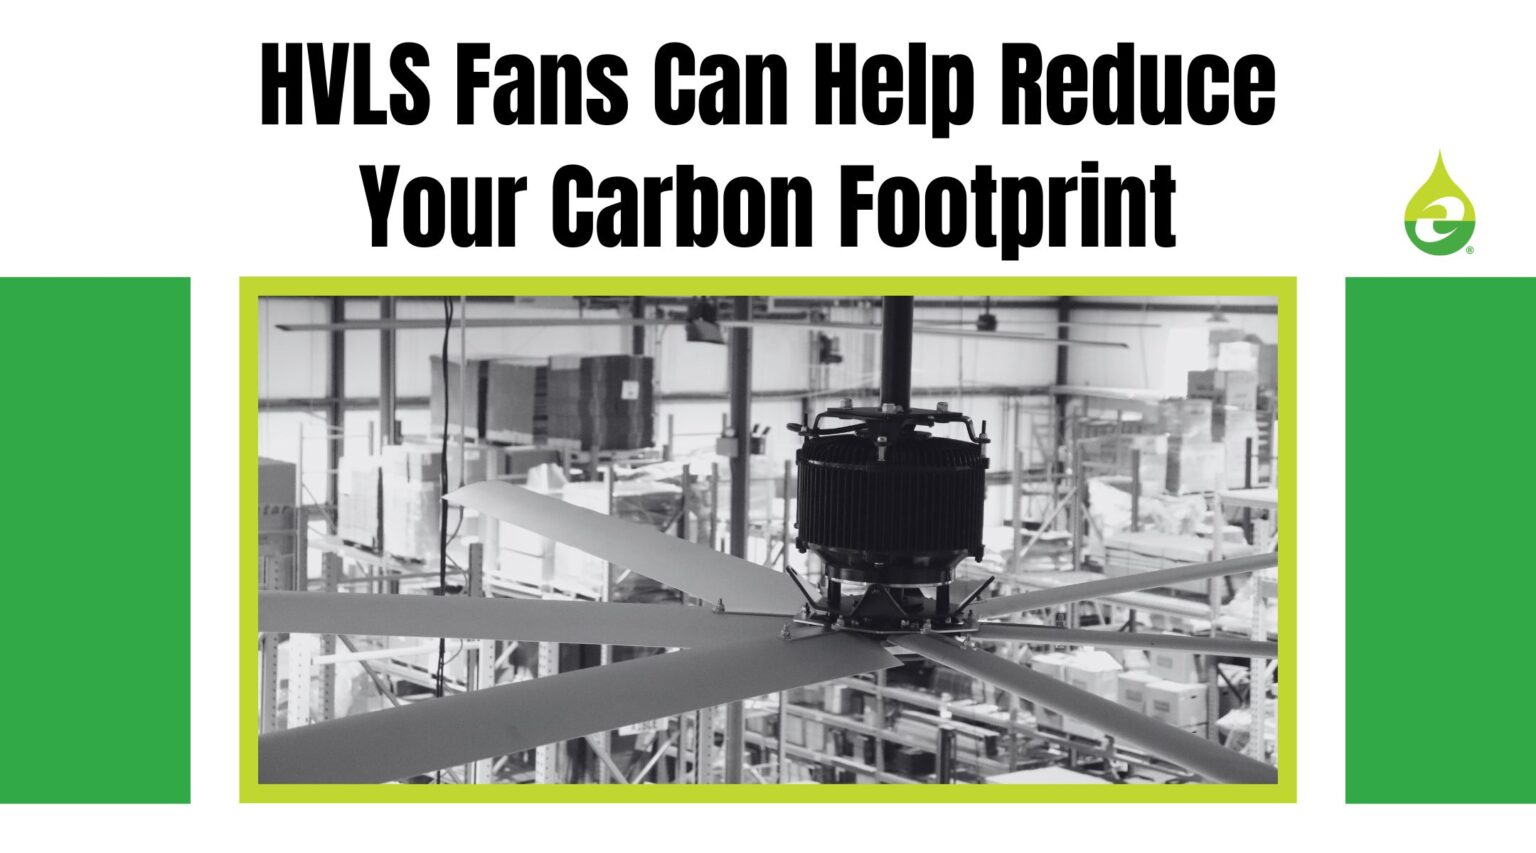 HVLS Fans Can Help Reduce Your Carbon Footprint